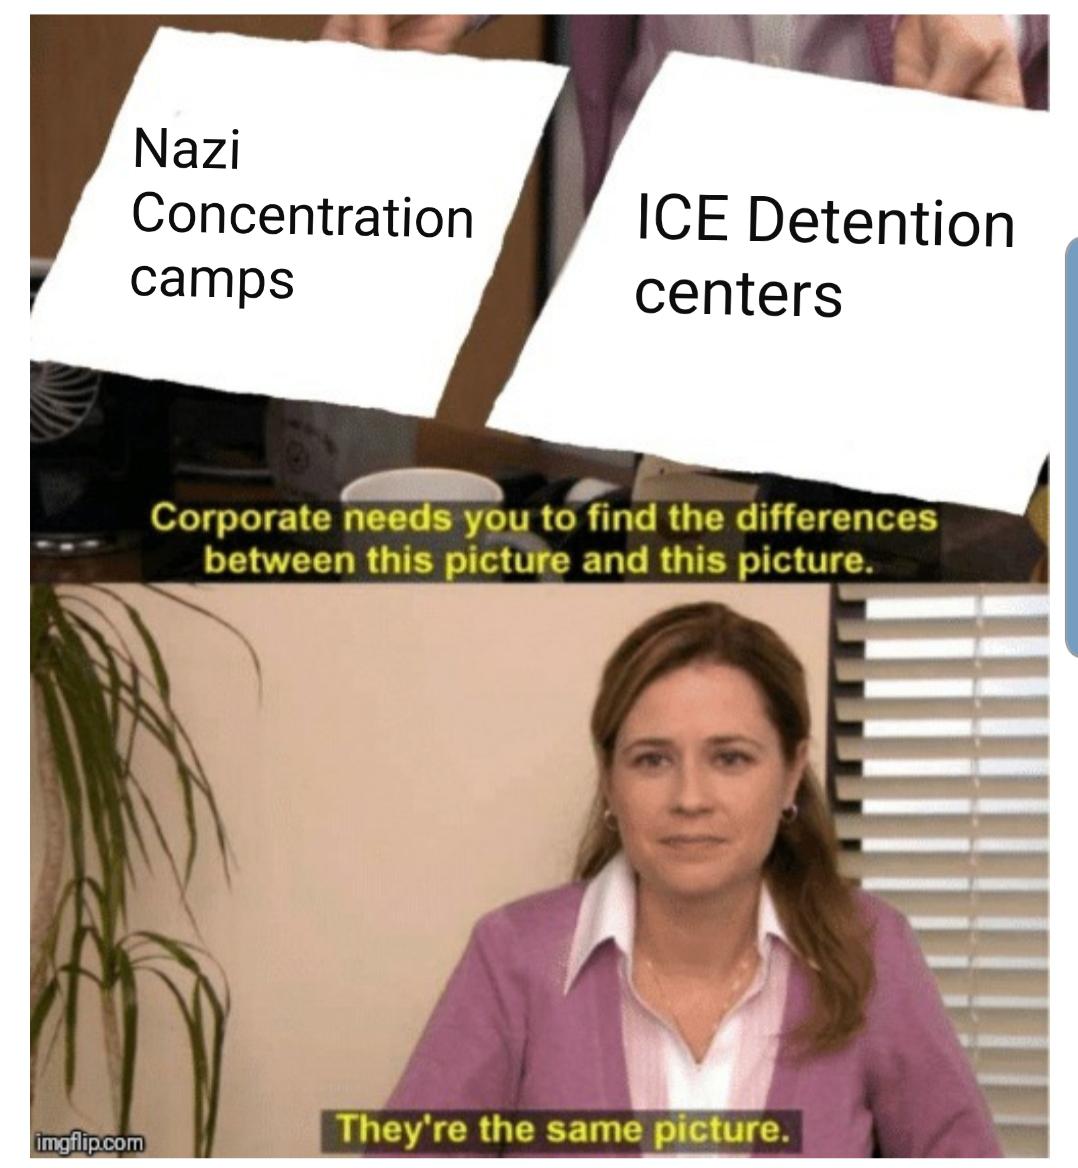 xbox 120 fps meme - Nazi Concentration camps Ice Detention centers Corporate needs you to find the differences between this picture and this picture. imgflip.com They're the same picture.